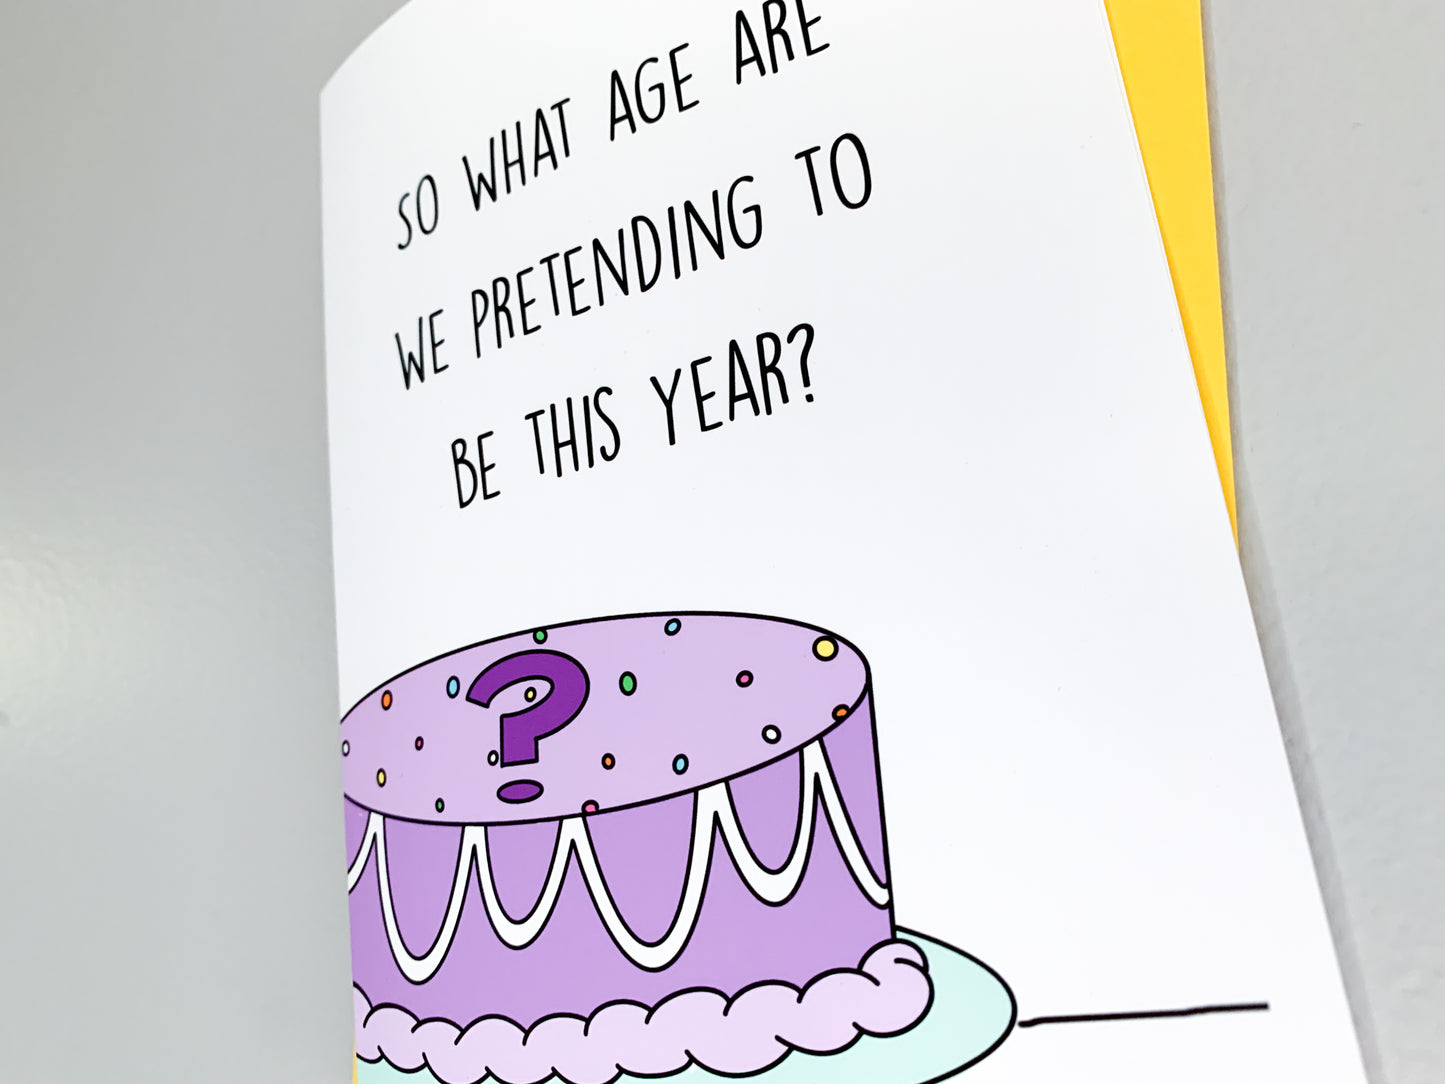 What Age Are We Pretending To Be Birthday Card